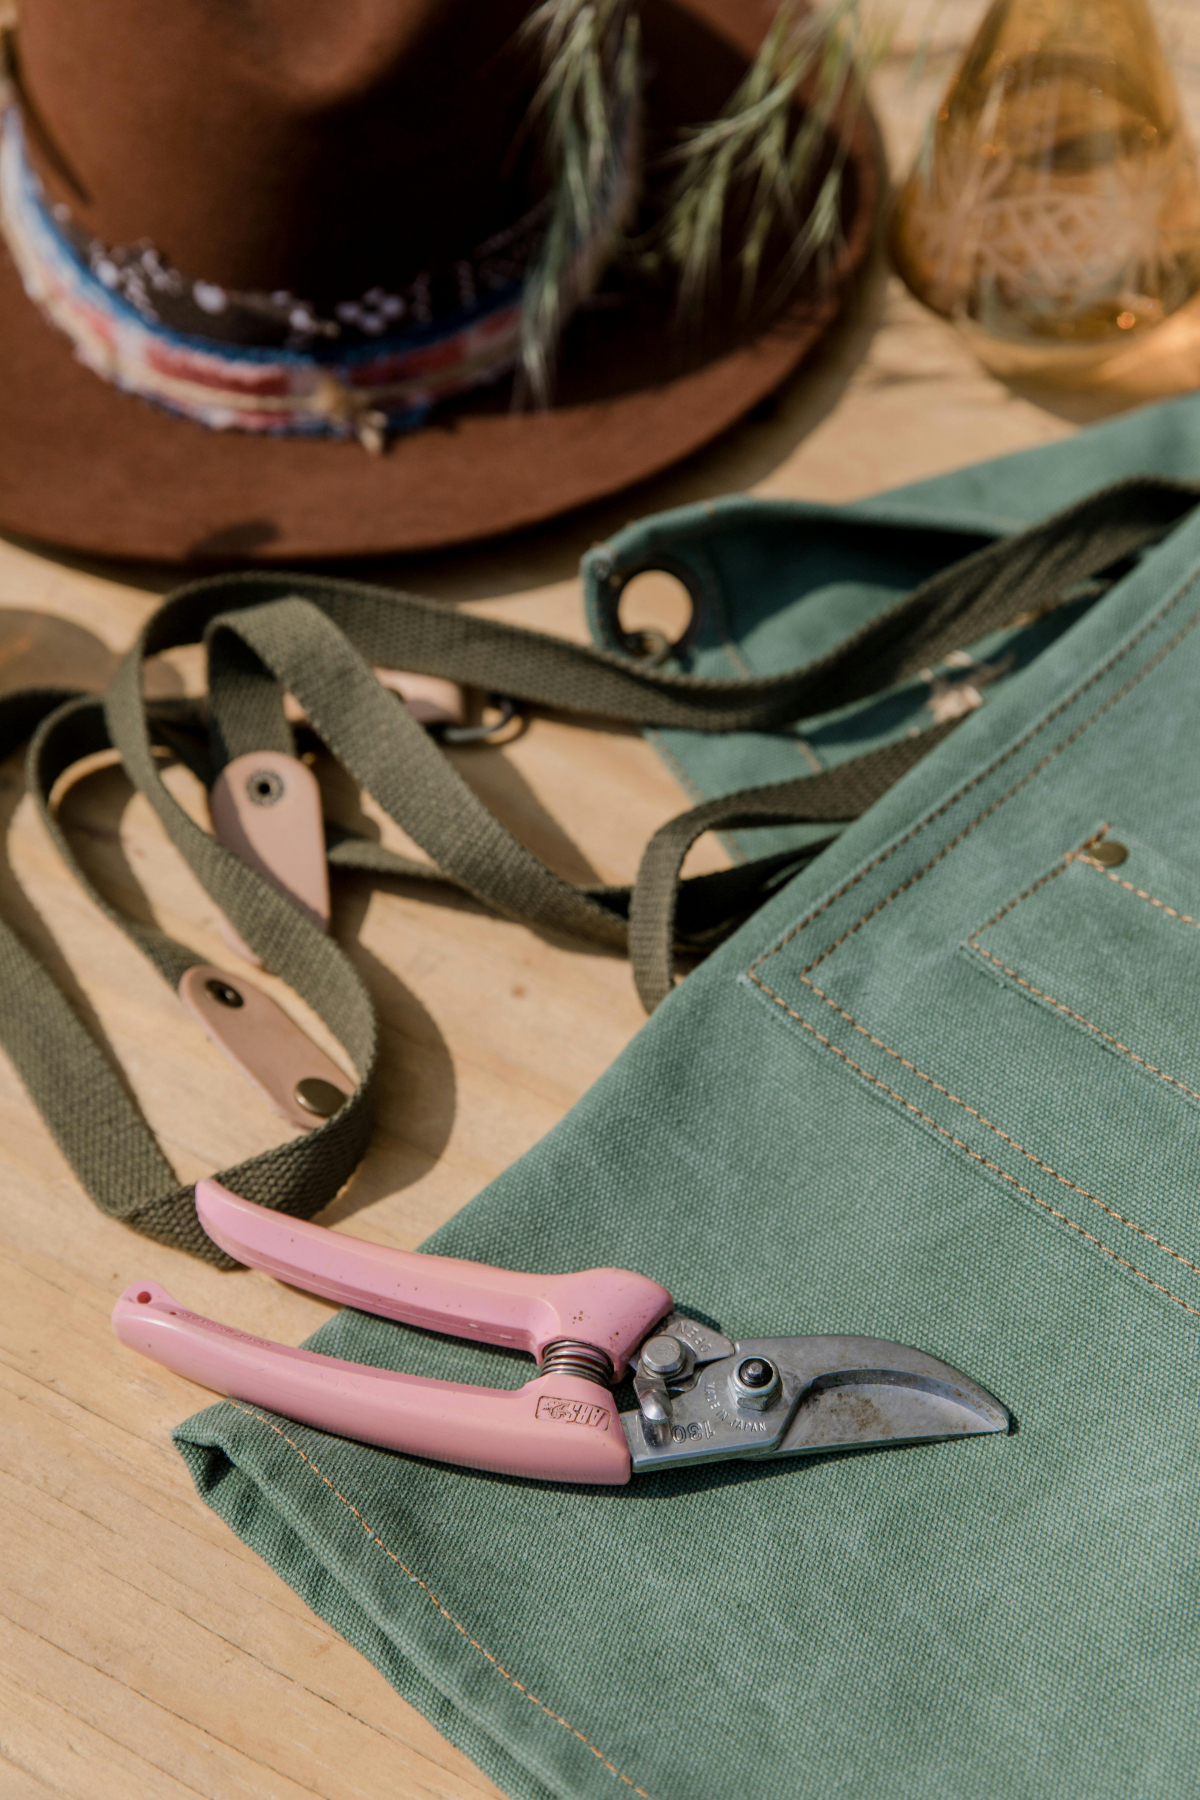 pruning shears and gardening tools